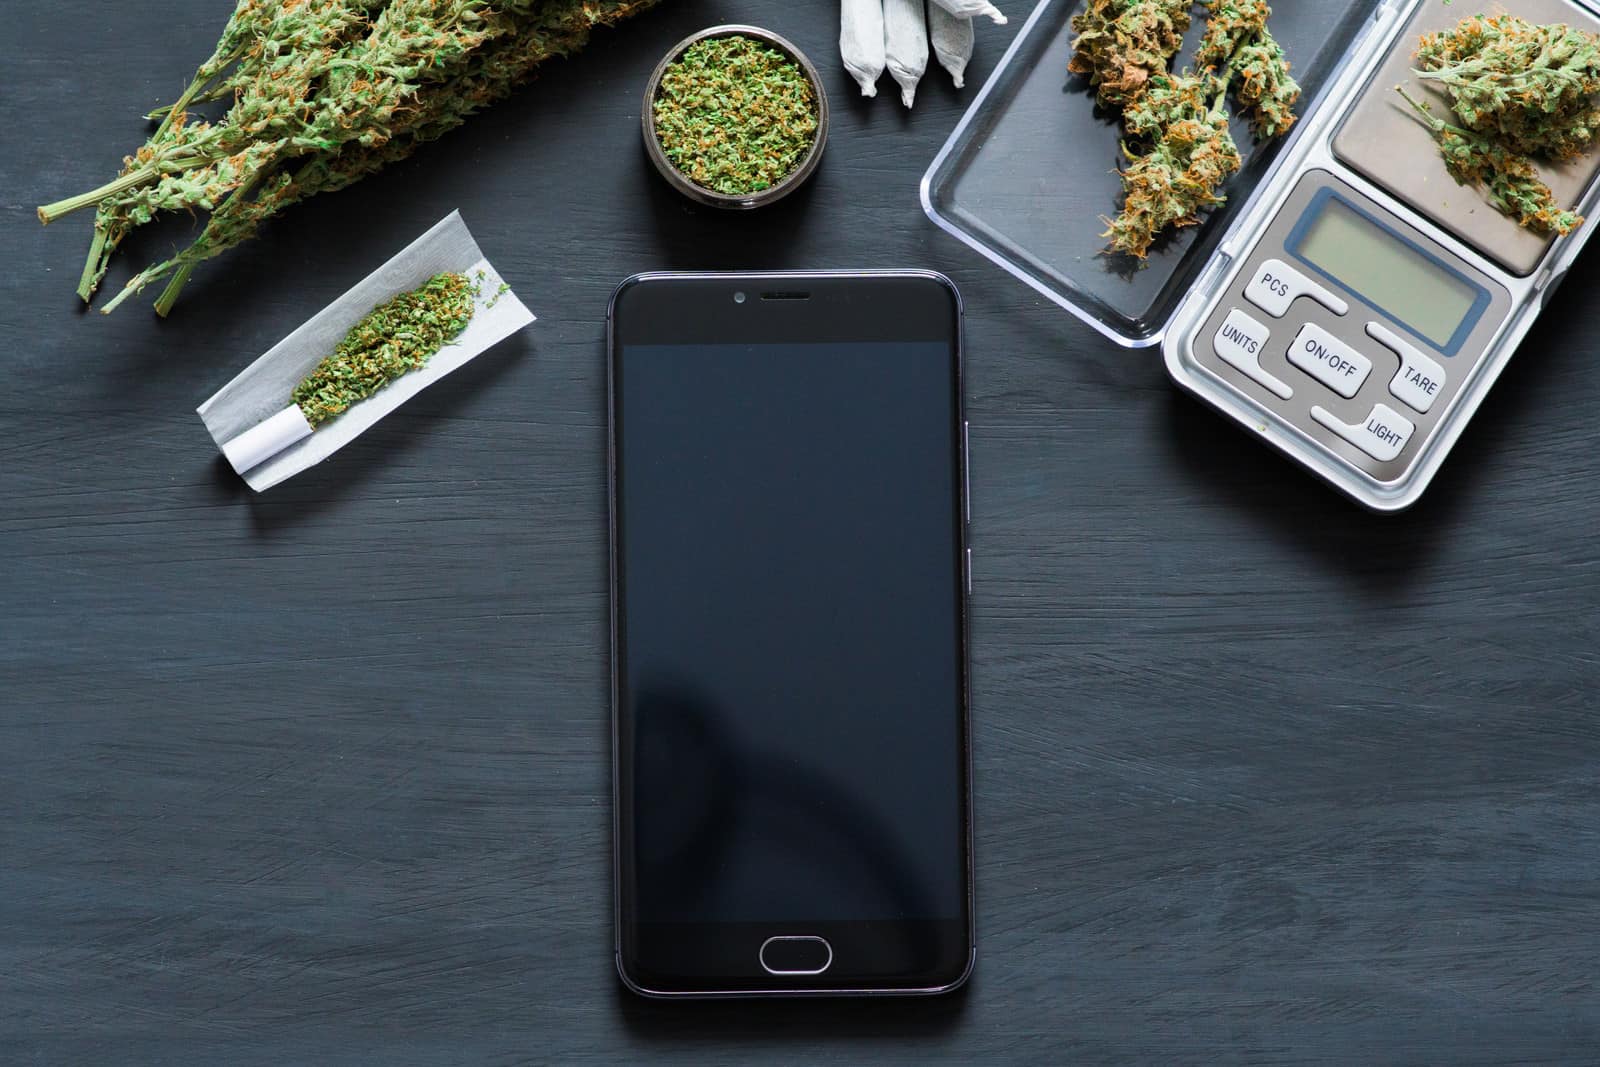 The truth About What It's Like To Be A Budtender. Cellphone surrounded by different types of weed.